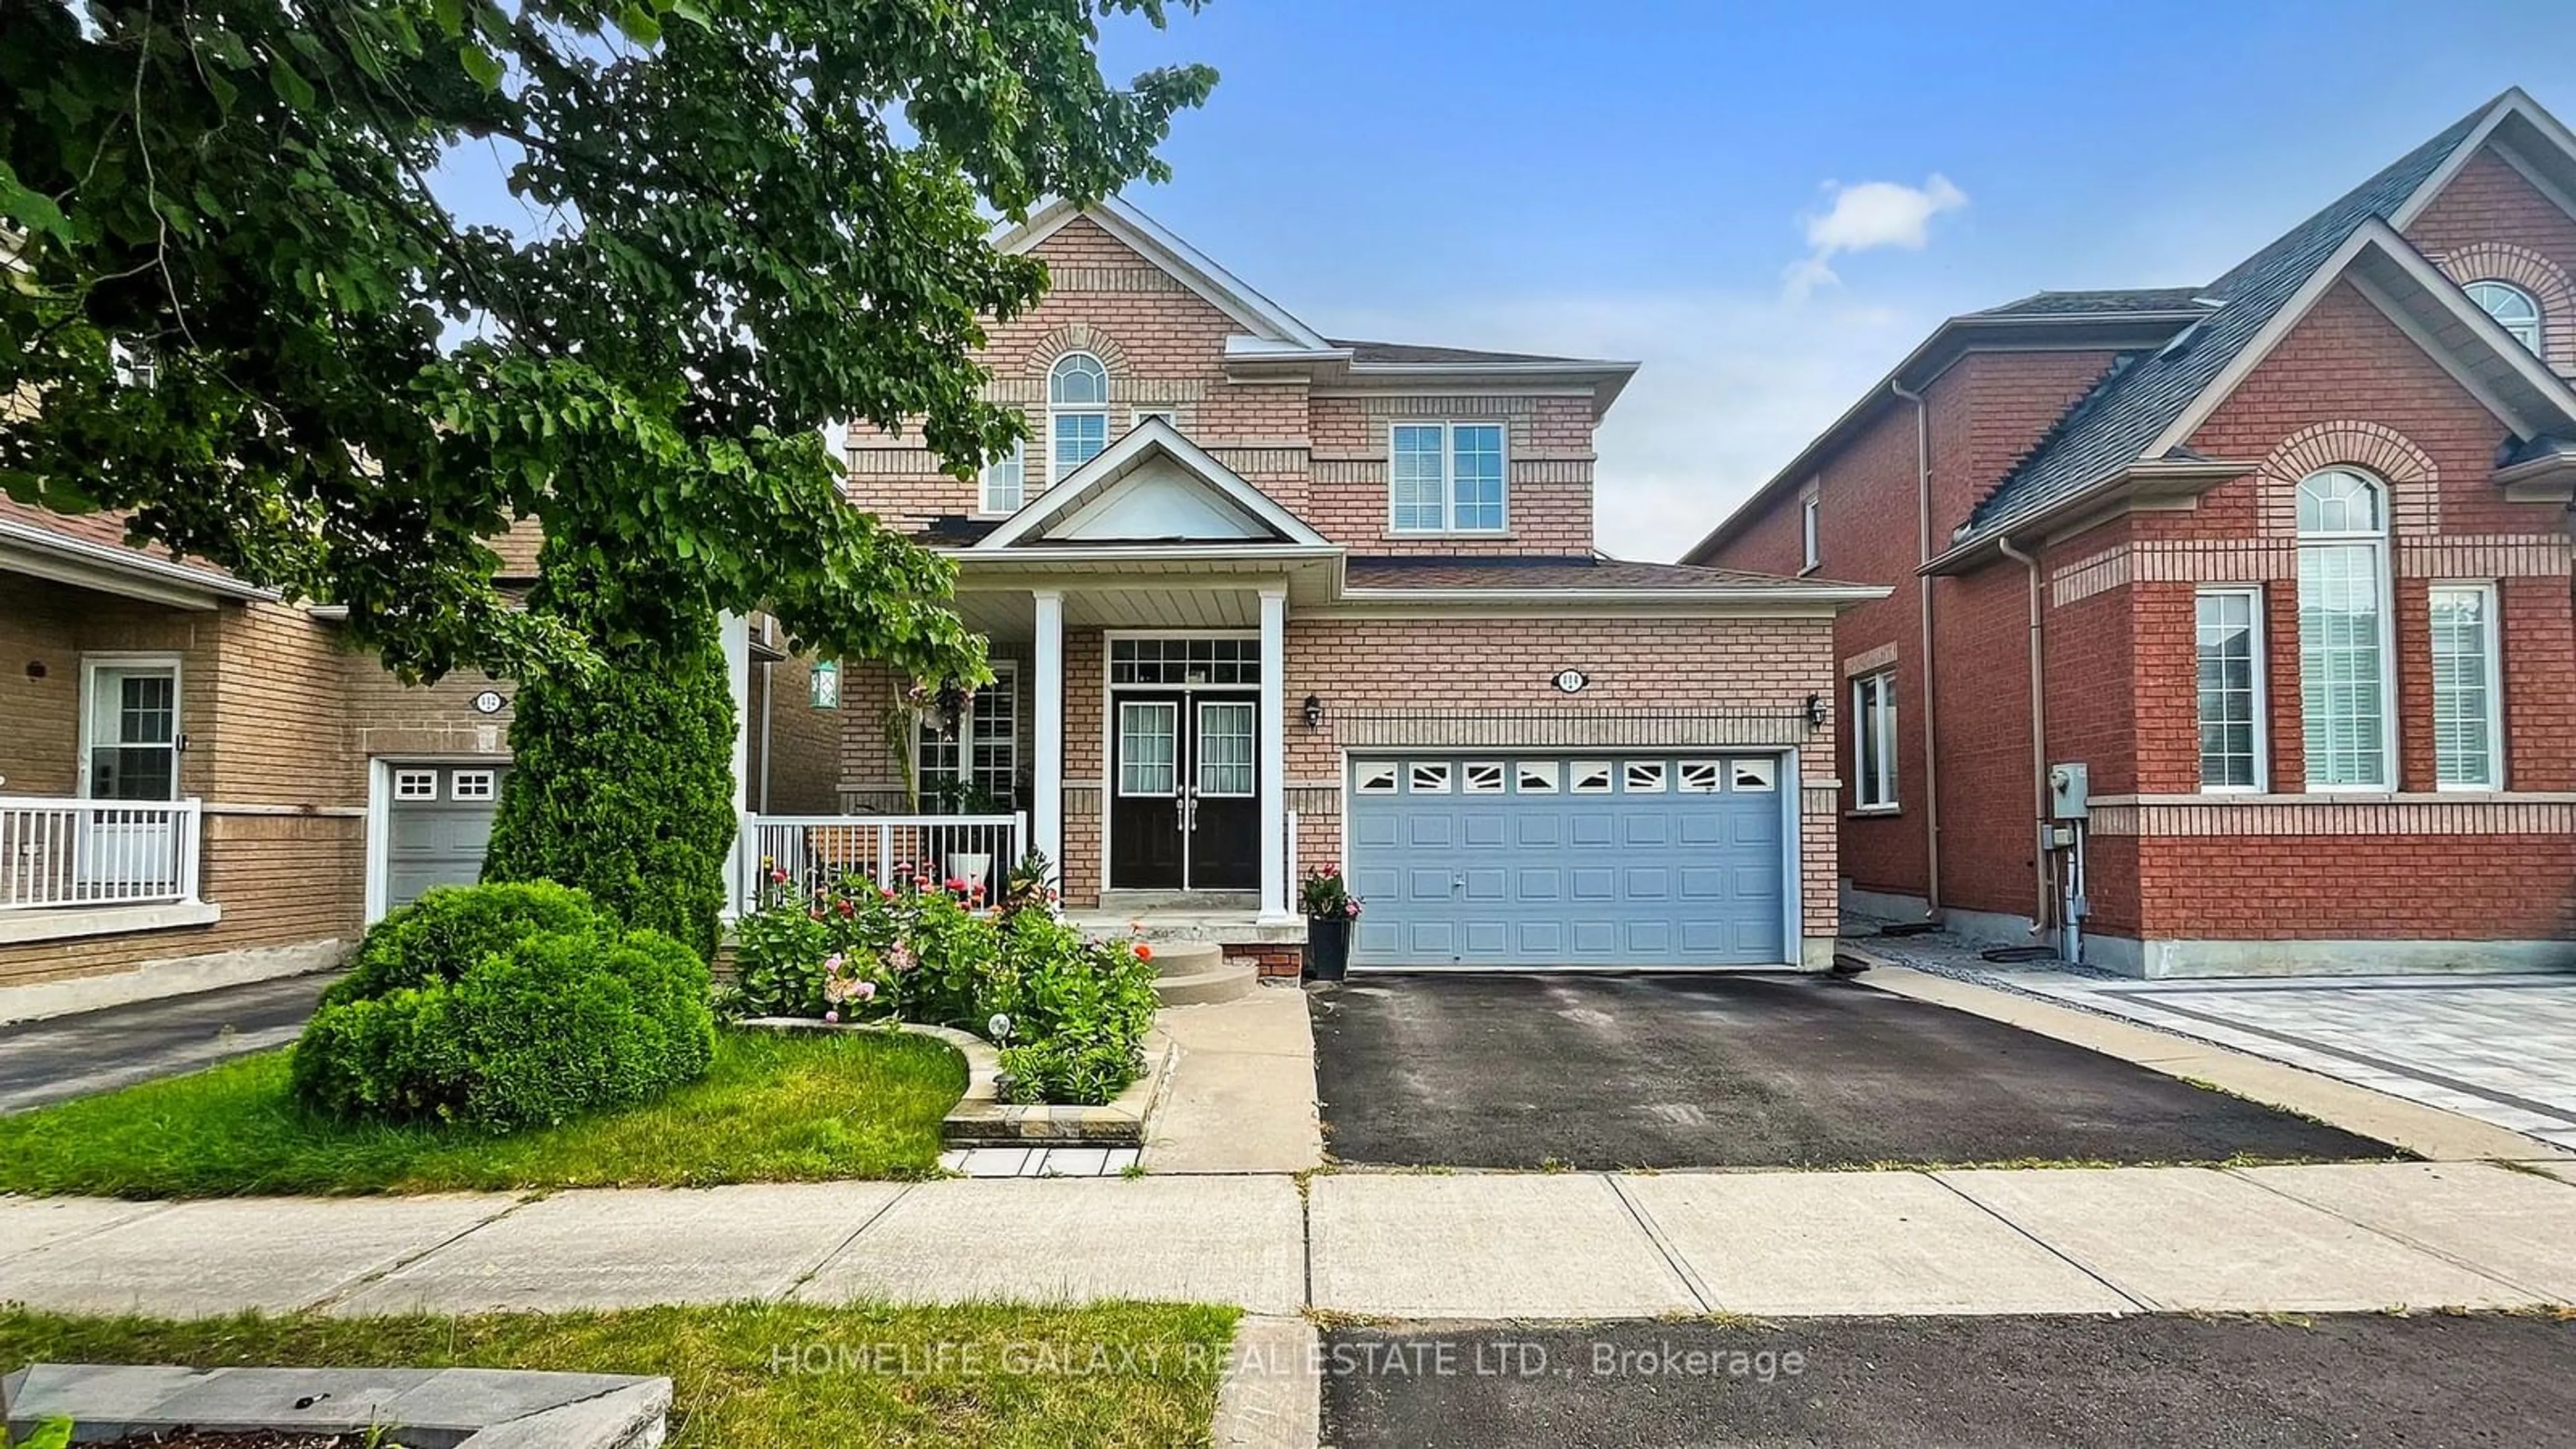 Home with brick exterior material for 114 Goldenwood Cres, Markham Ontario L6E 1L9